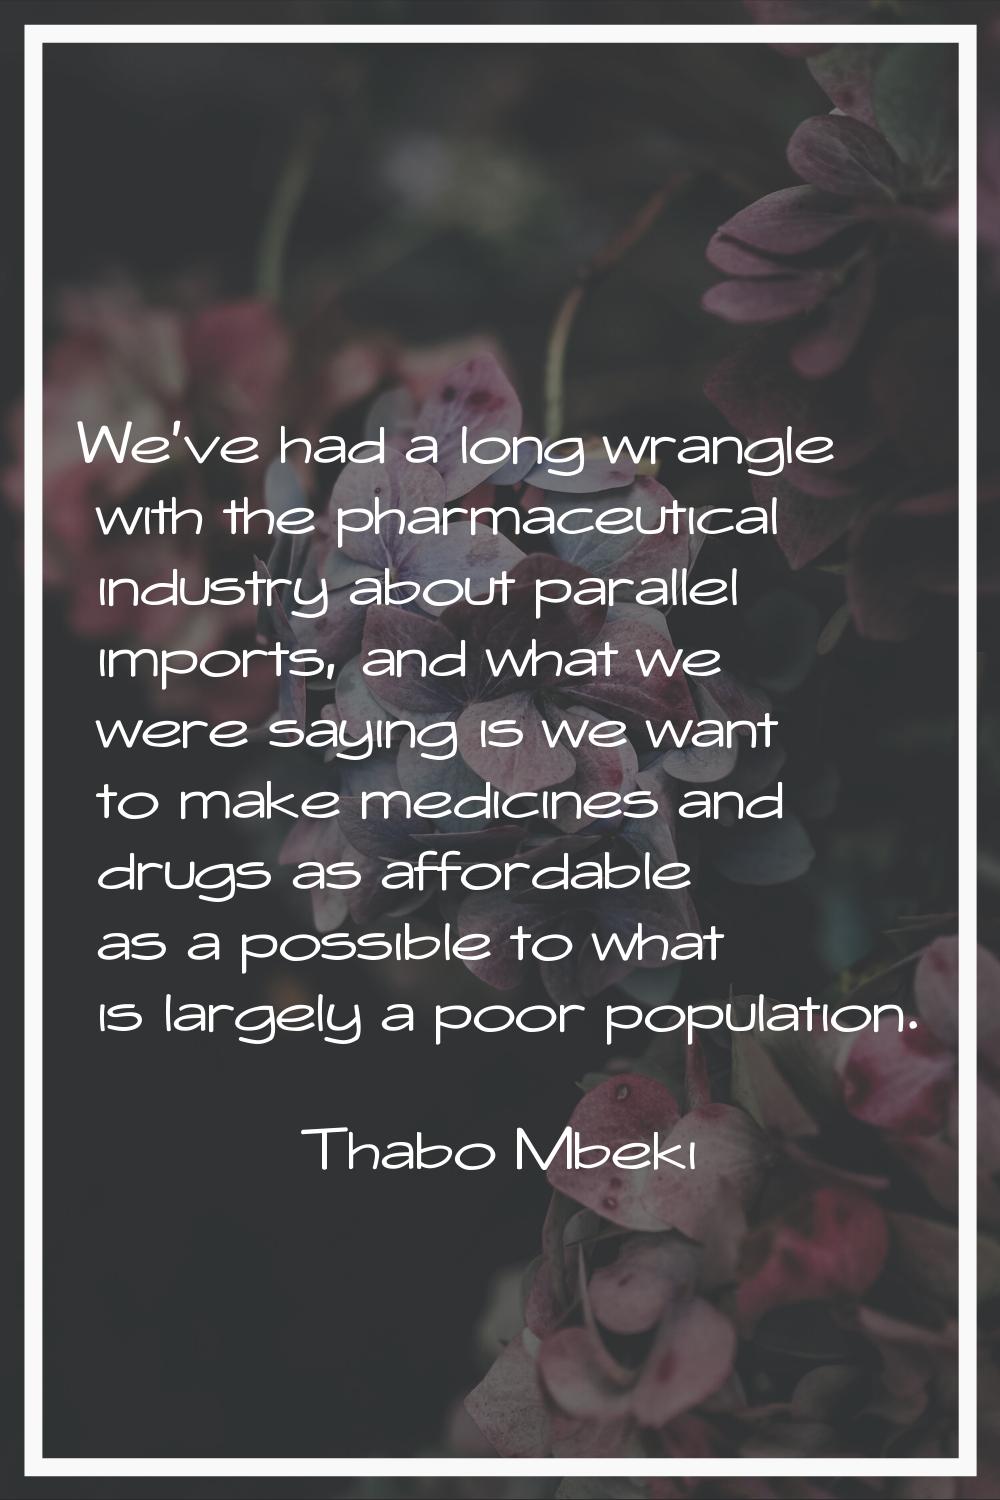 We've had a long wrangle with the pharmaceutical industry about parallel imports, and what we were 